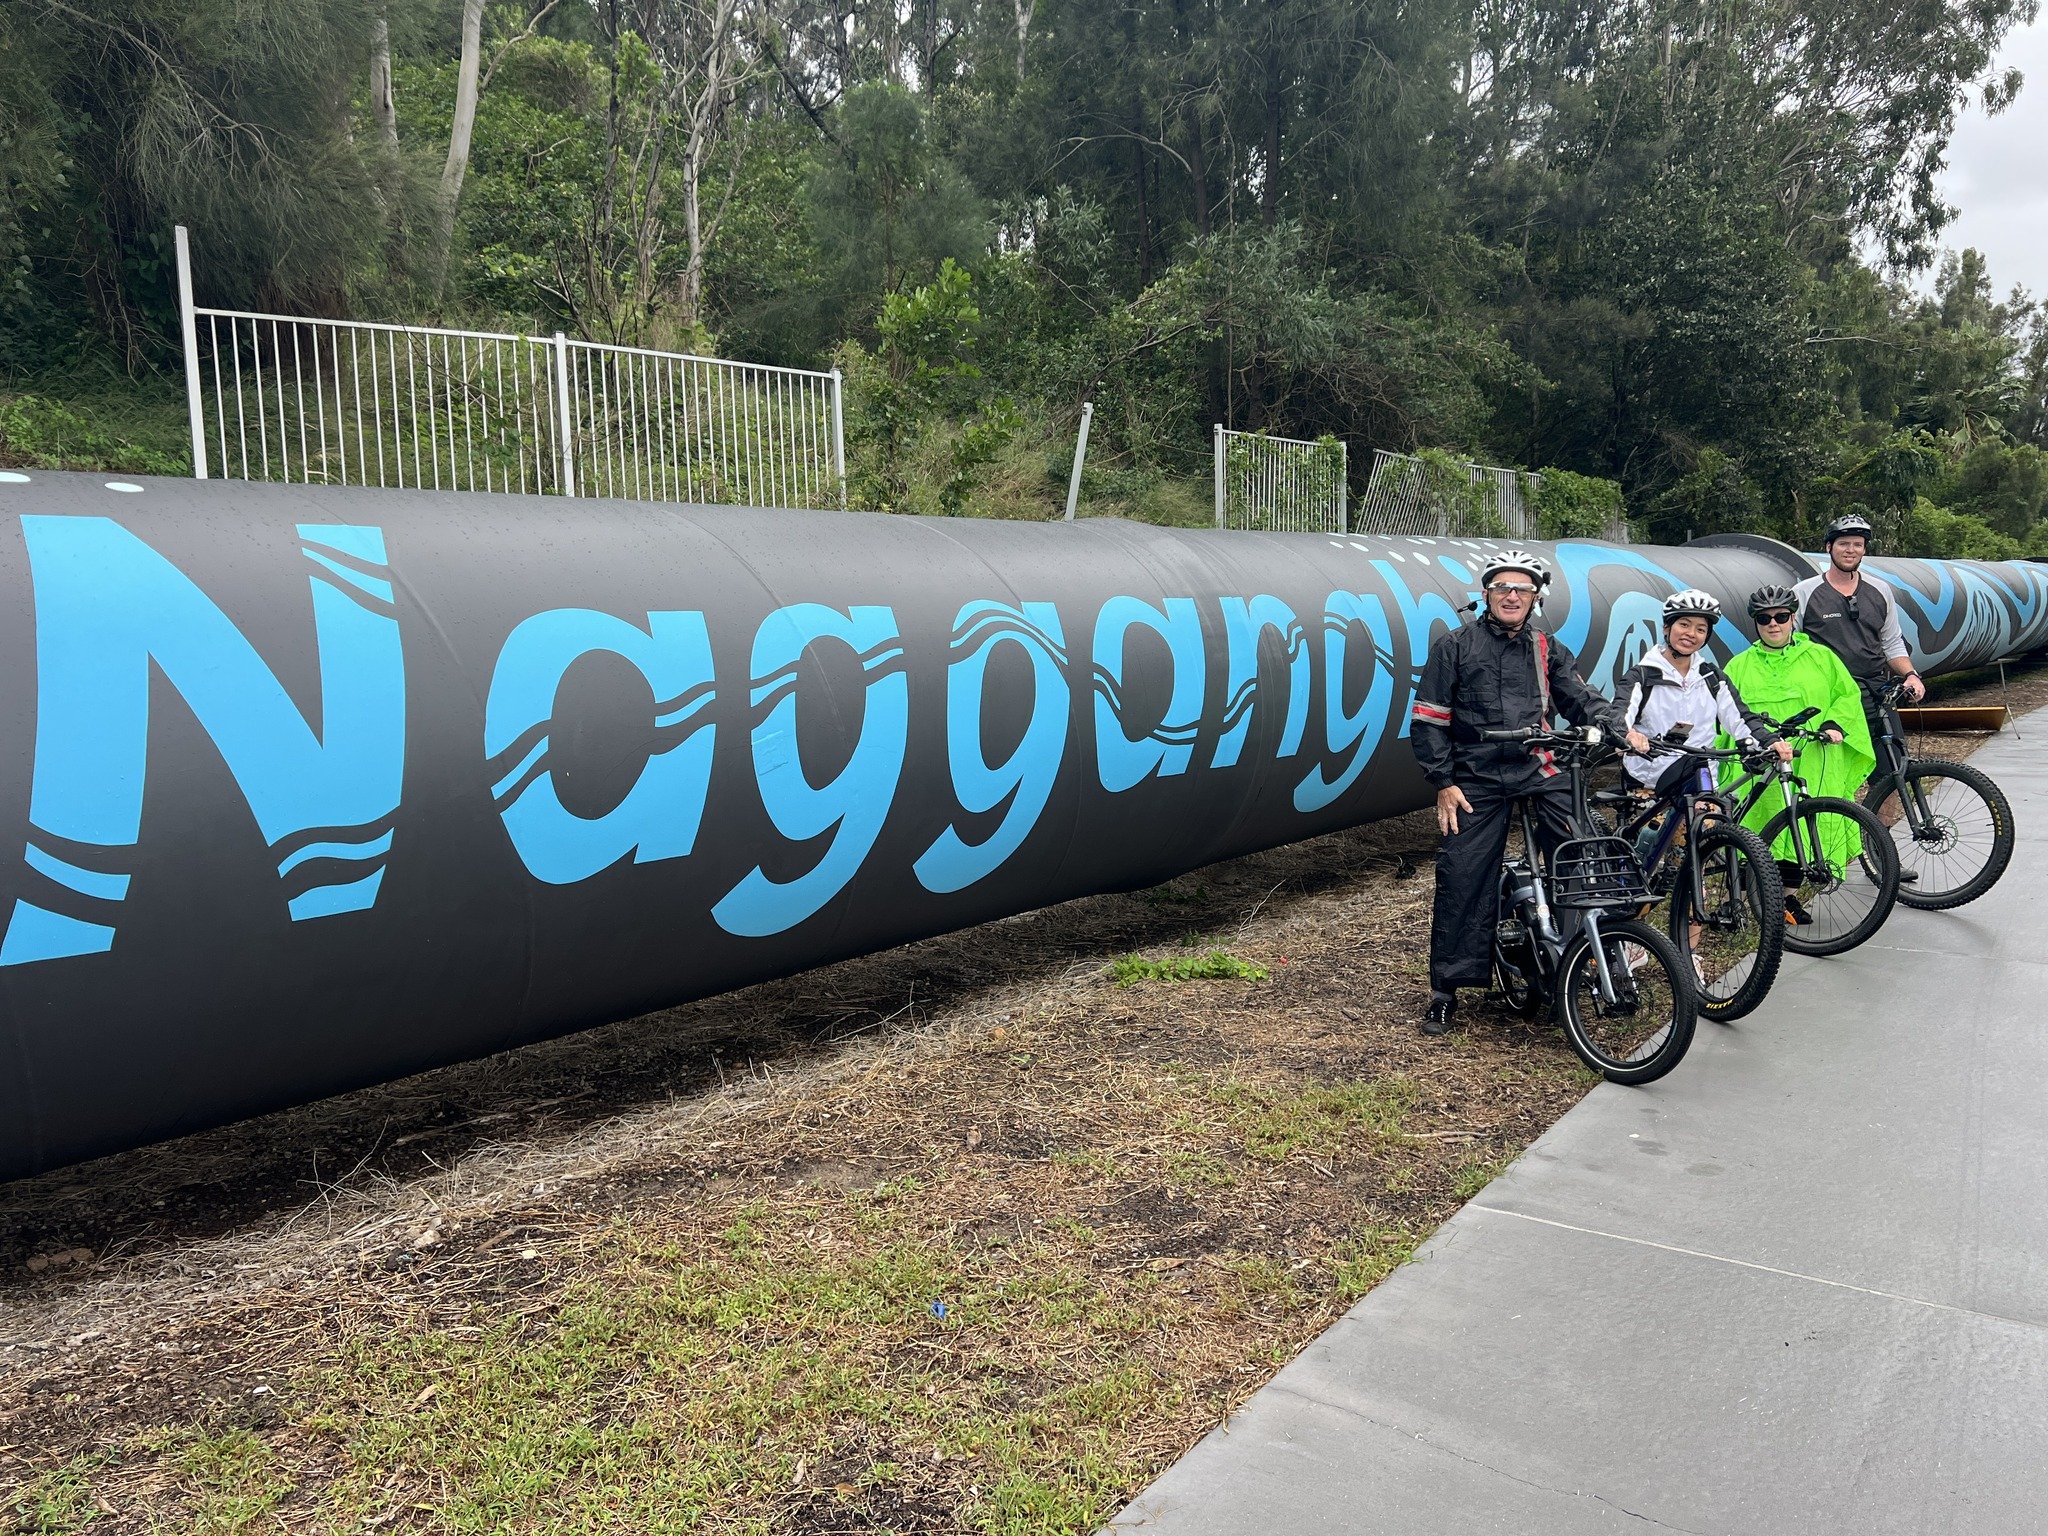 Join in on this Free Guided Ride! Sunday, 26th May 11.45am
Discover new cycleways on a leisurely bike ride that starts in Erskineville, rolls through to Tempe and loops back via an alternative route. This ride highlights all the options for planning 